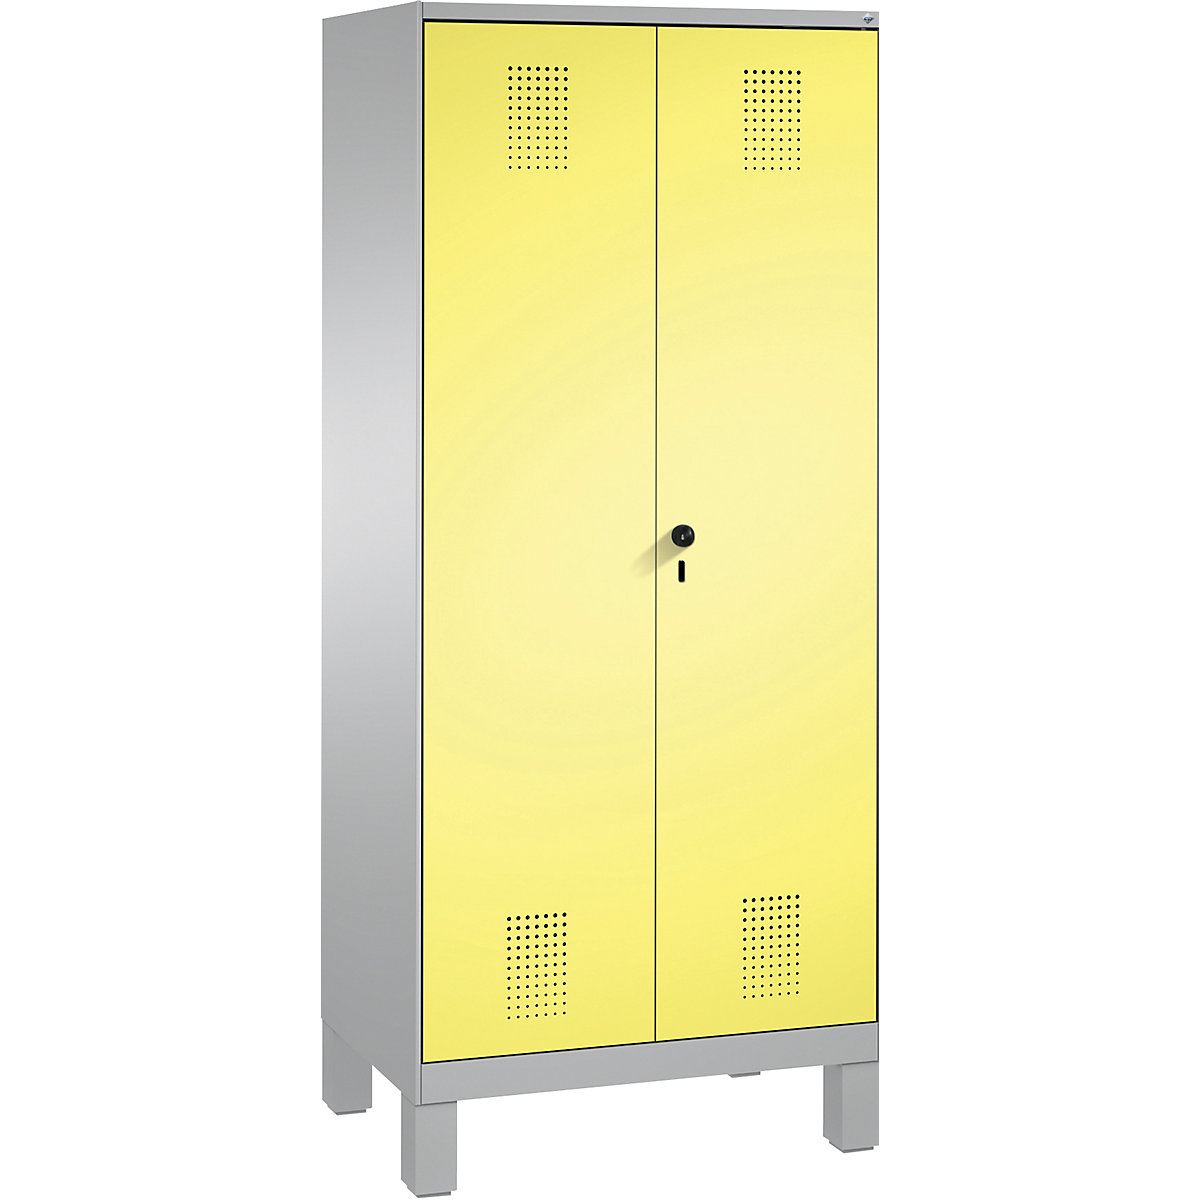 EVOLO storage cupboard, doors close in the middle, with feet – C+P, 2 compartments, 8 shelves, compartment width 400 mm, white aluminium / sulphur yellow-2